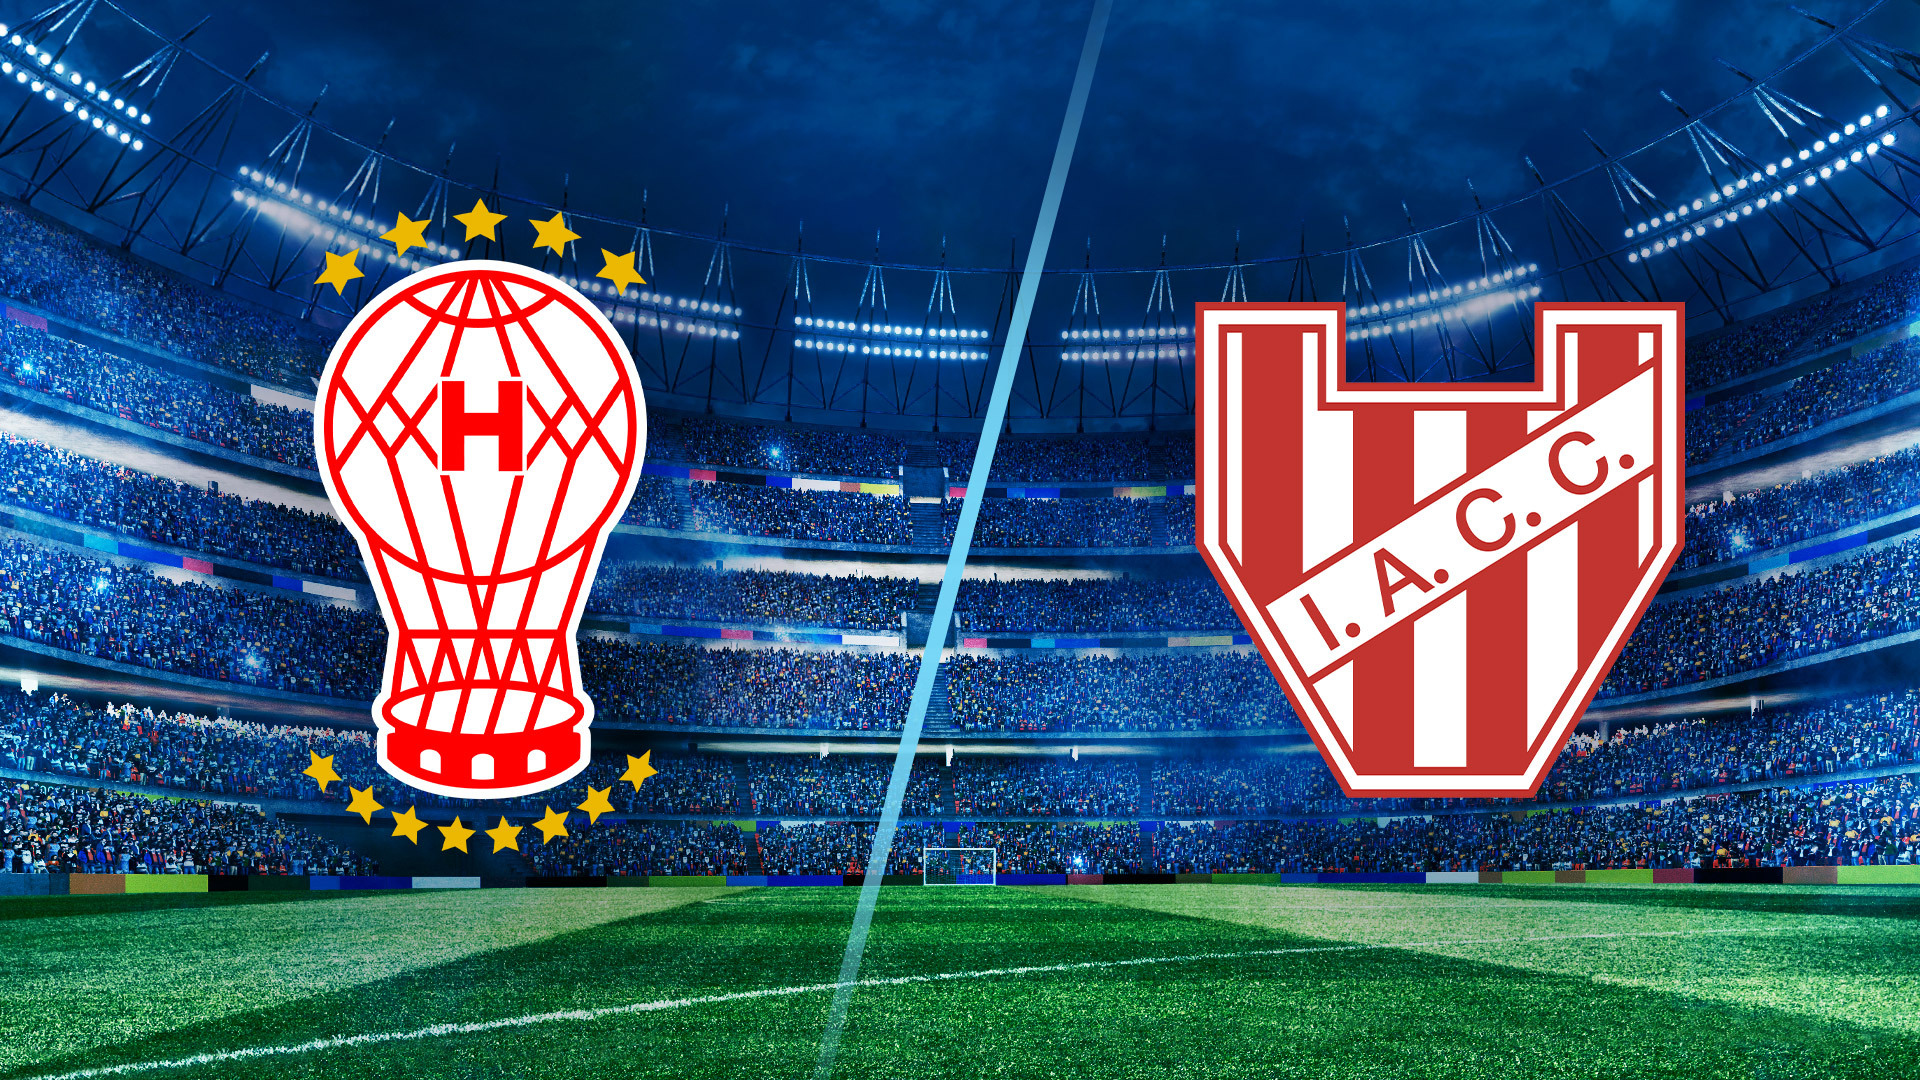 Instituto vs Huracán Match Preview